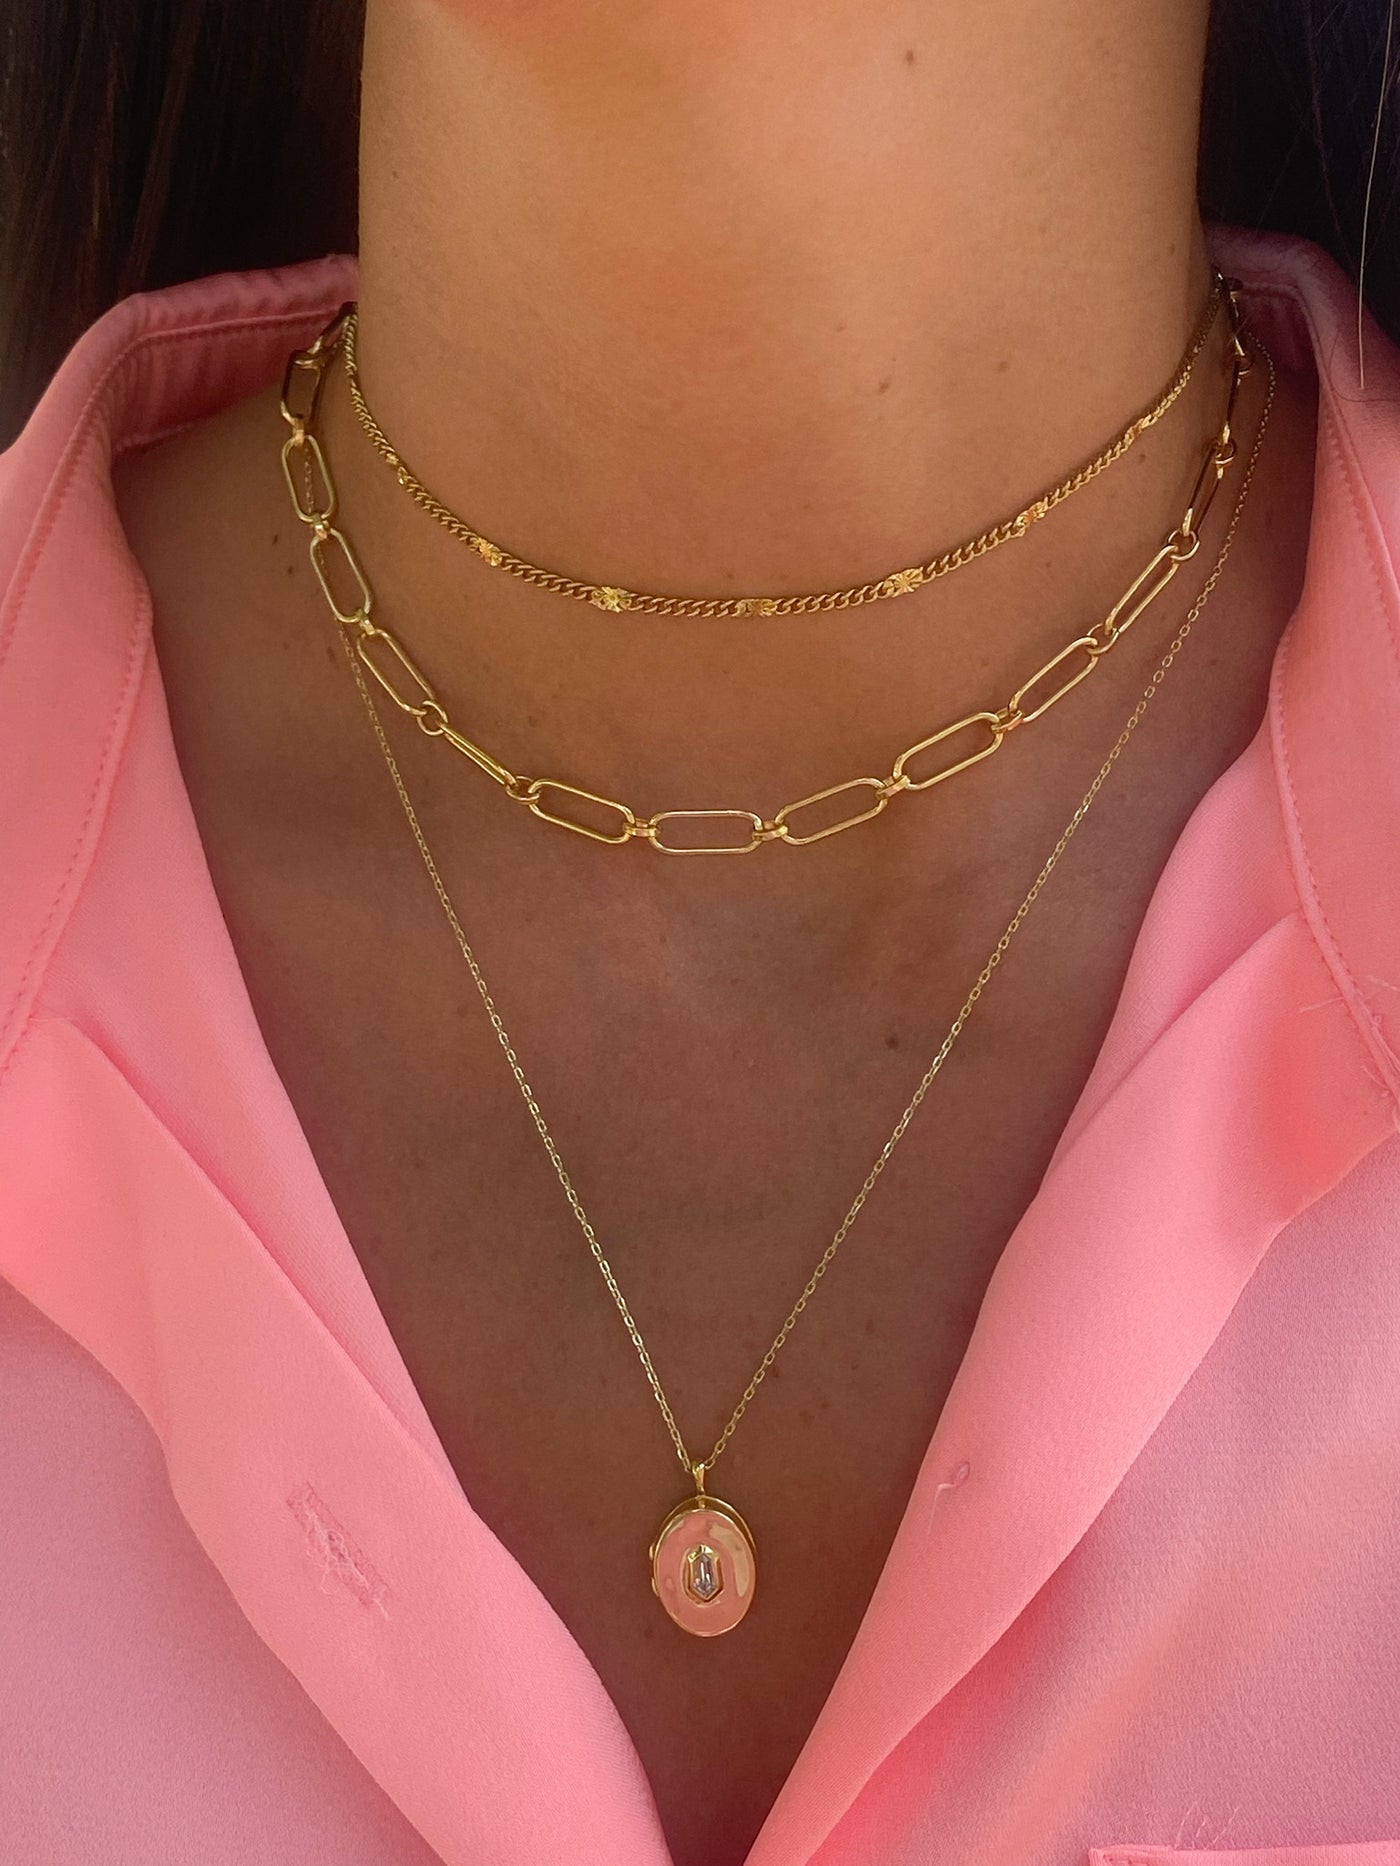 Gold Cable Connect Chunky Chain Necklace